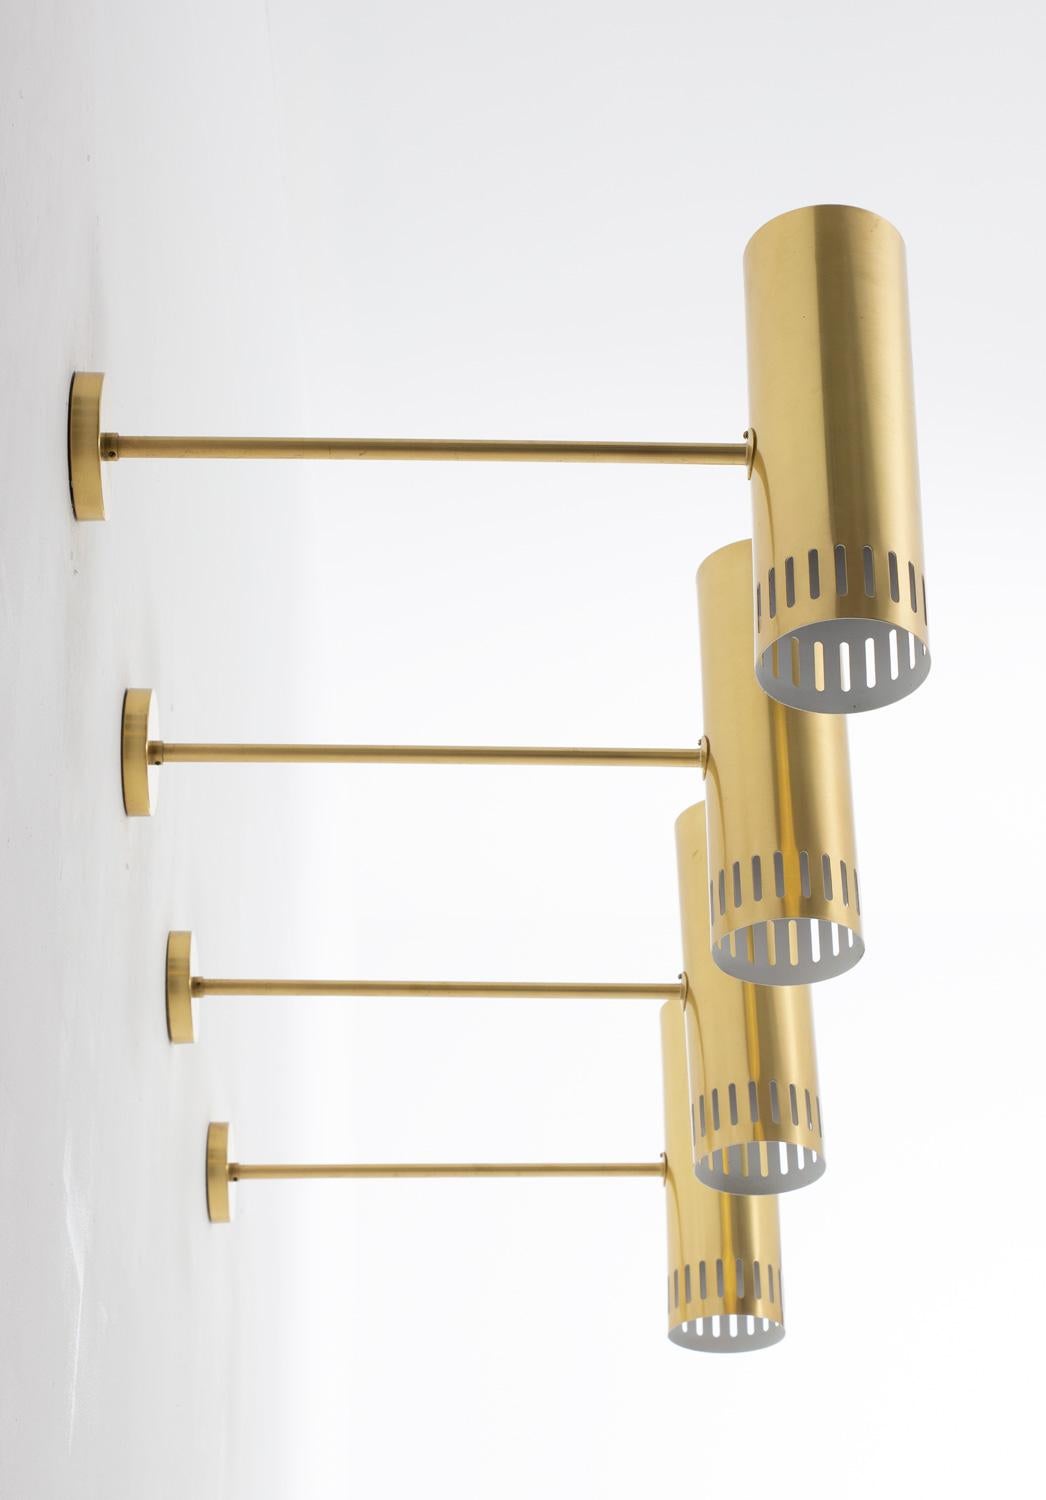 Rare midcentury wall lamps, produced by Boréns, Sweden, circa 1960.
These lamps are made of solid, thick brass. They feature one light source, hidden by a cylinder-shaped perforated brass shade.
9 lamps available.
Condition: These lamps come from